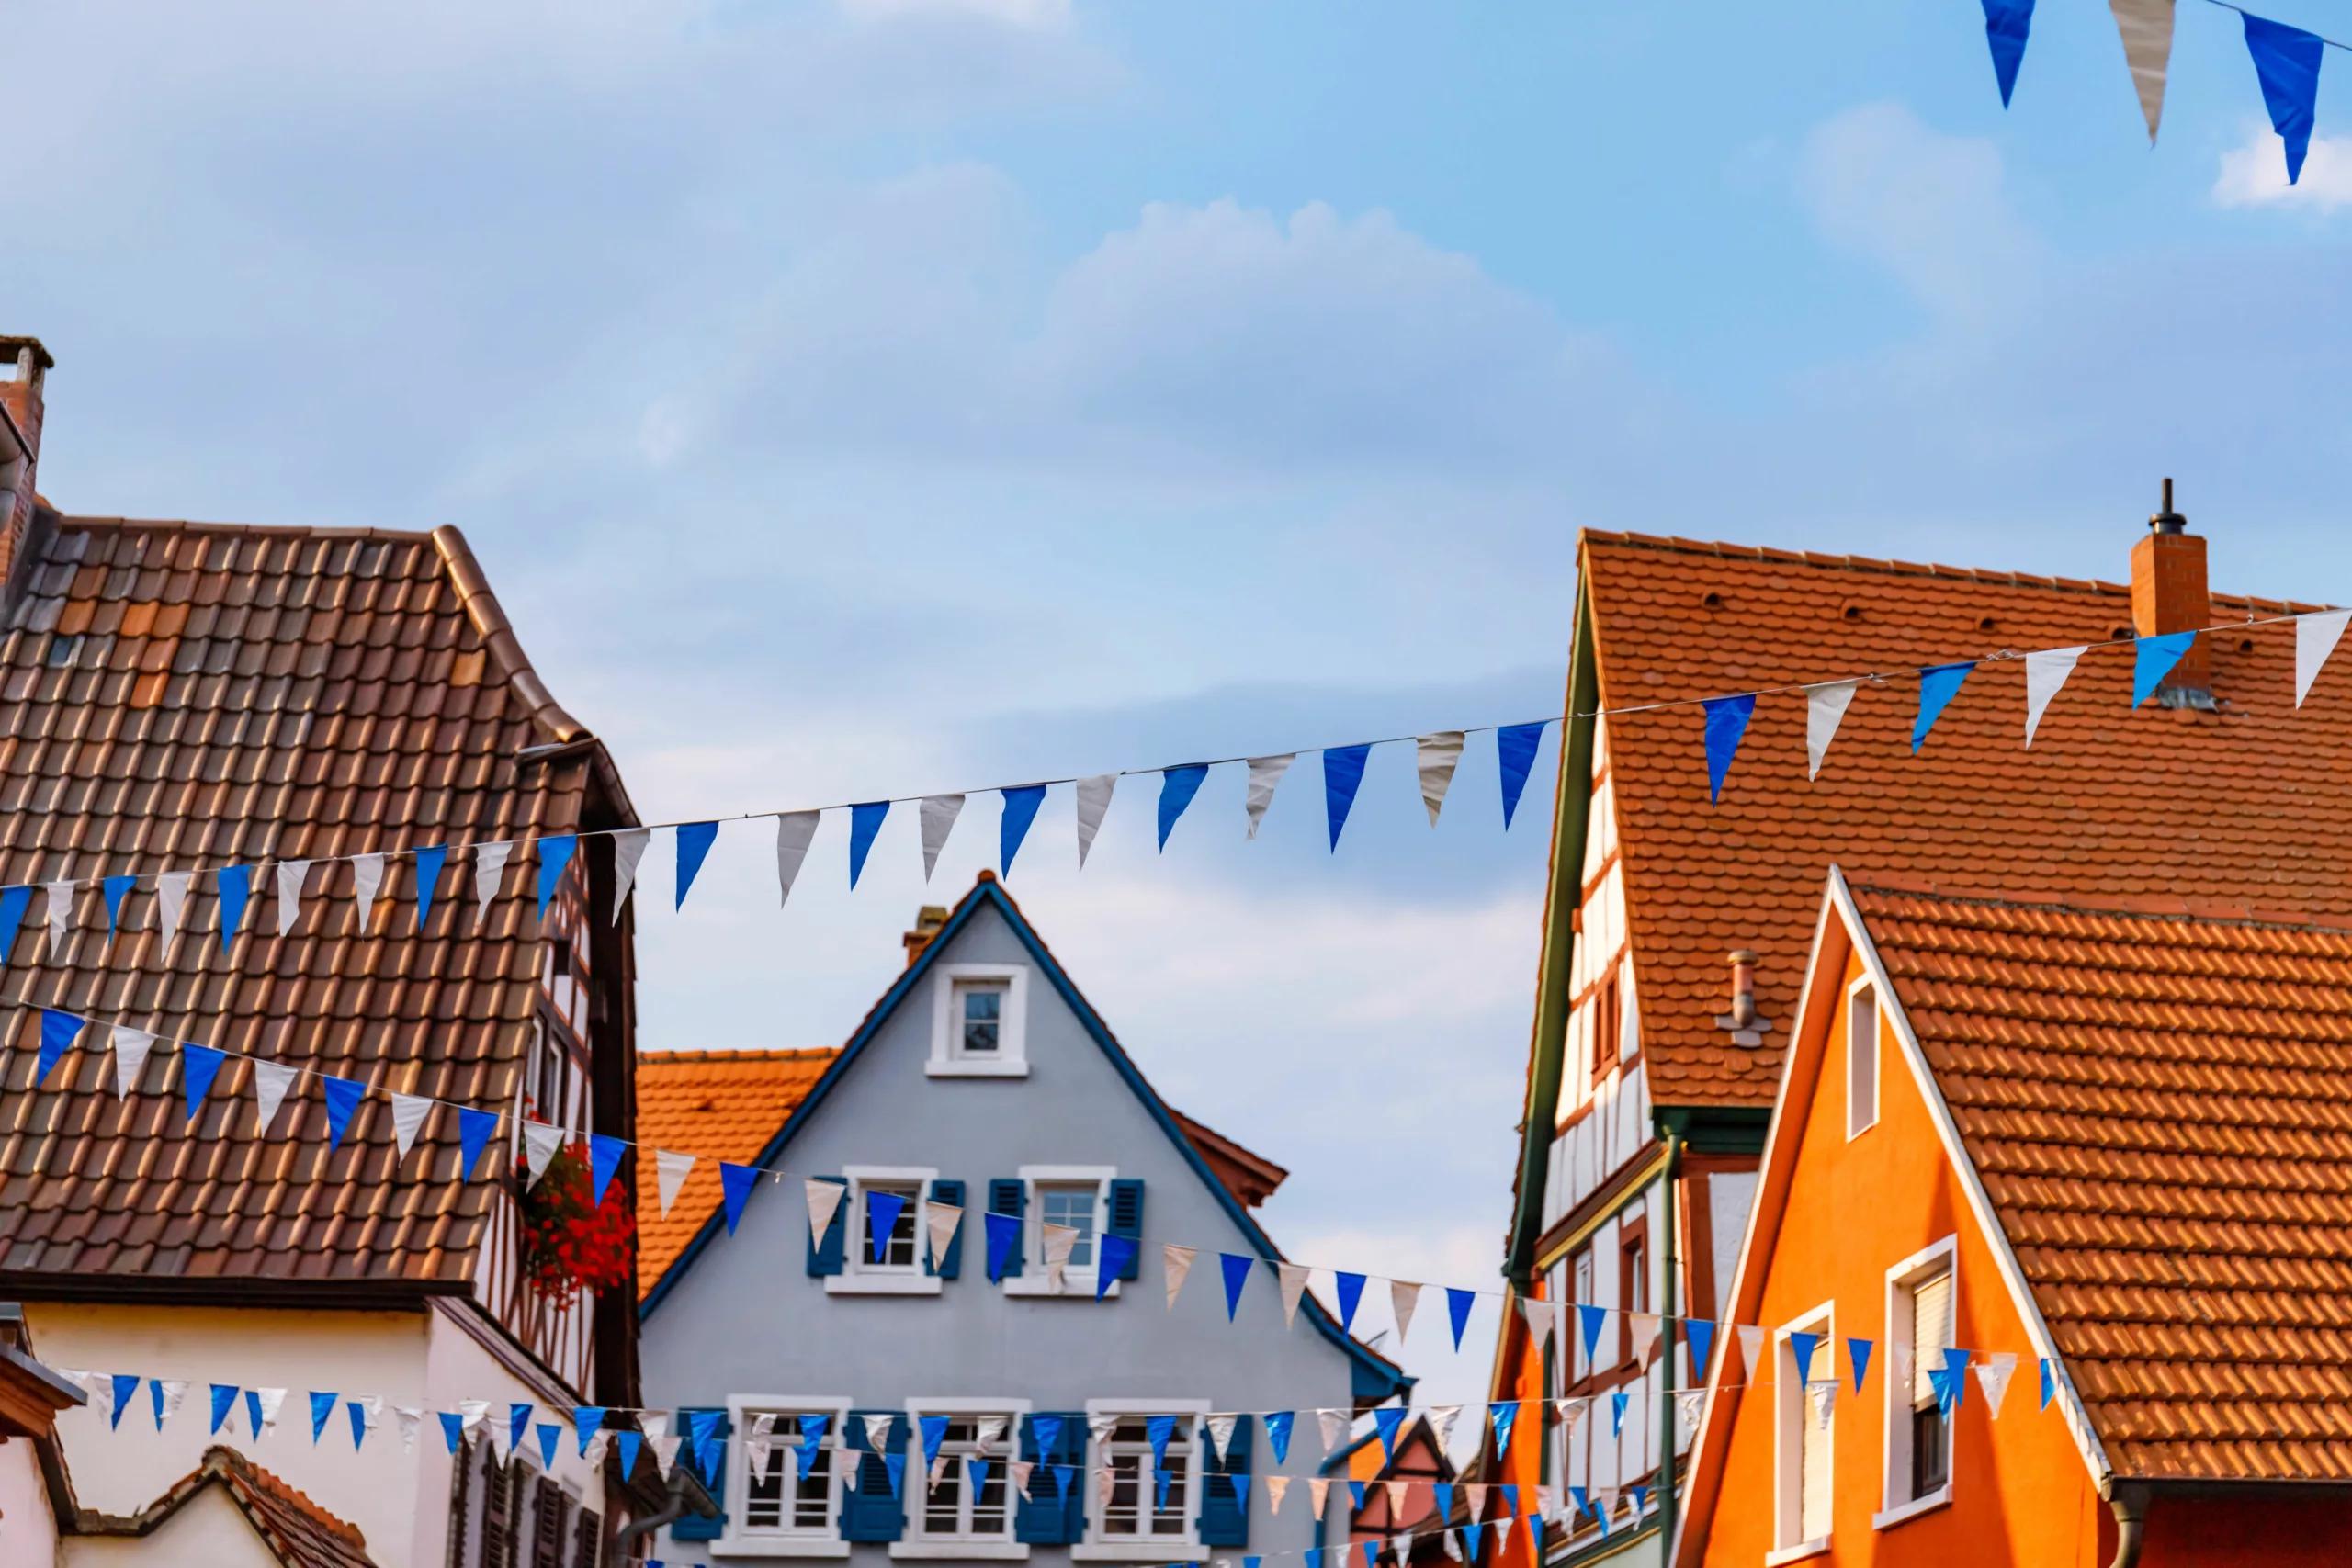 German Village Festivals are a great place to experience authentic German culture without the touristy kitsch.